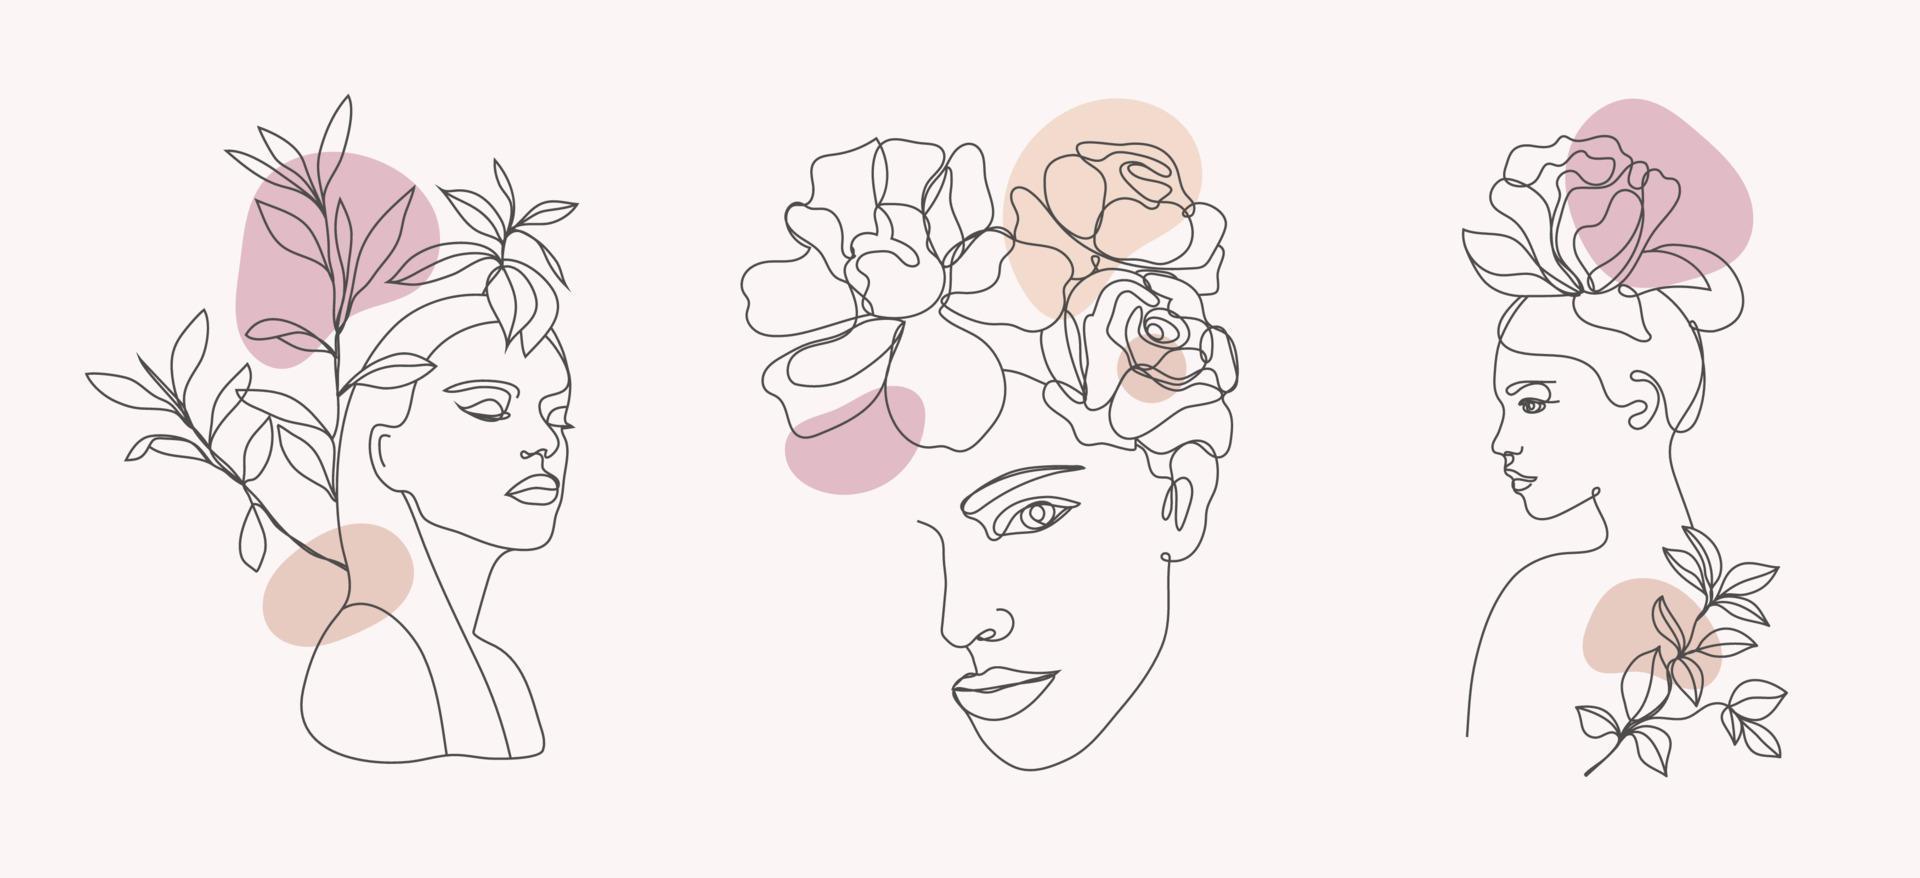 Vector set of women faces, line art illustrations, logos with flowers and leaves, feminine nature concept. Use for prints, tattoos, posters, textile, logotypes, cards etc. Beautiful women faces